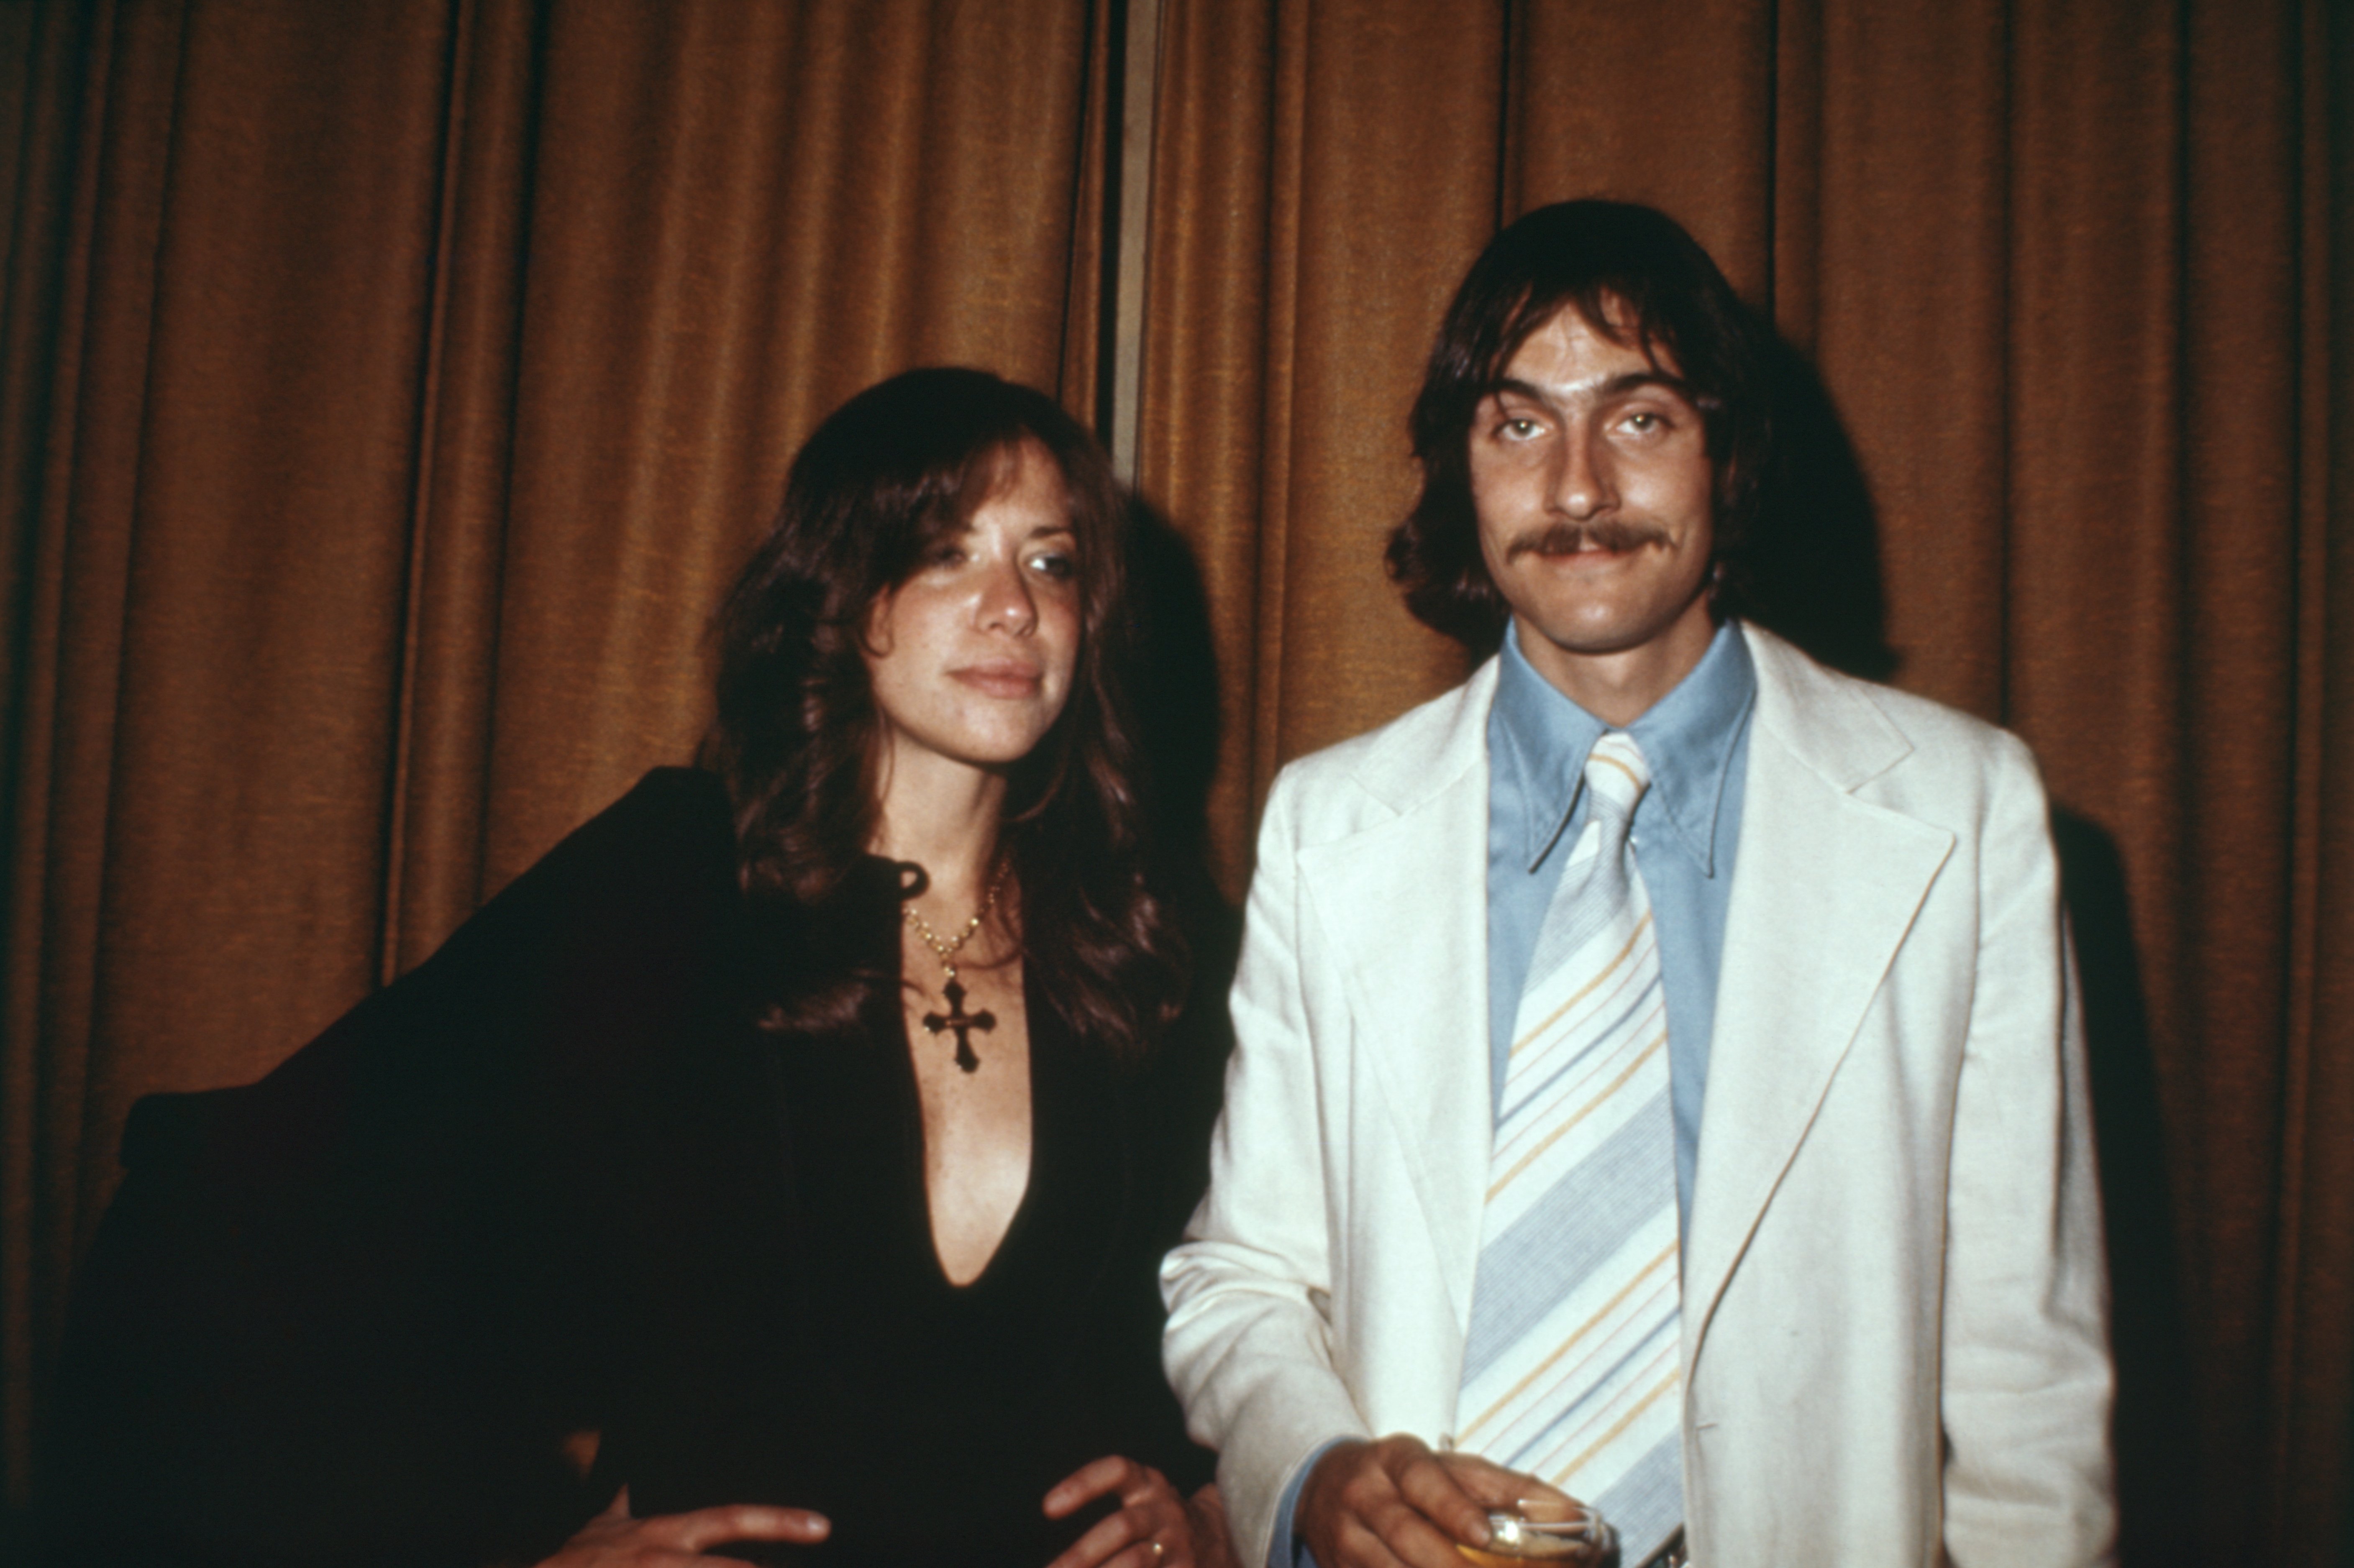 James Taylor pictured with wife Carly Simon at the Waldorf Astoria Hotel on March 20, 1973 in New York, New York ┃Source: Getty Images